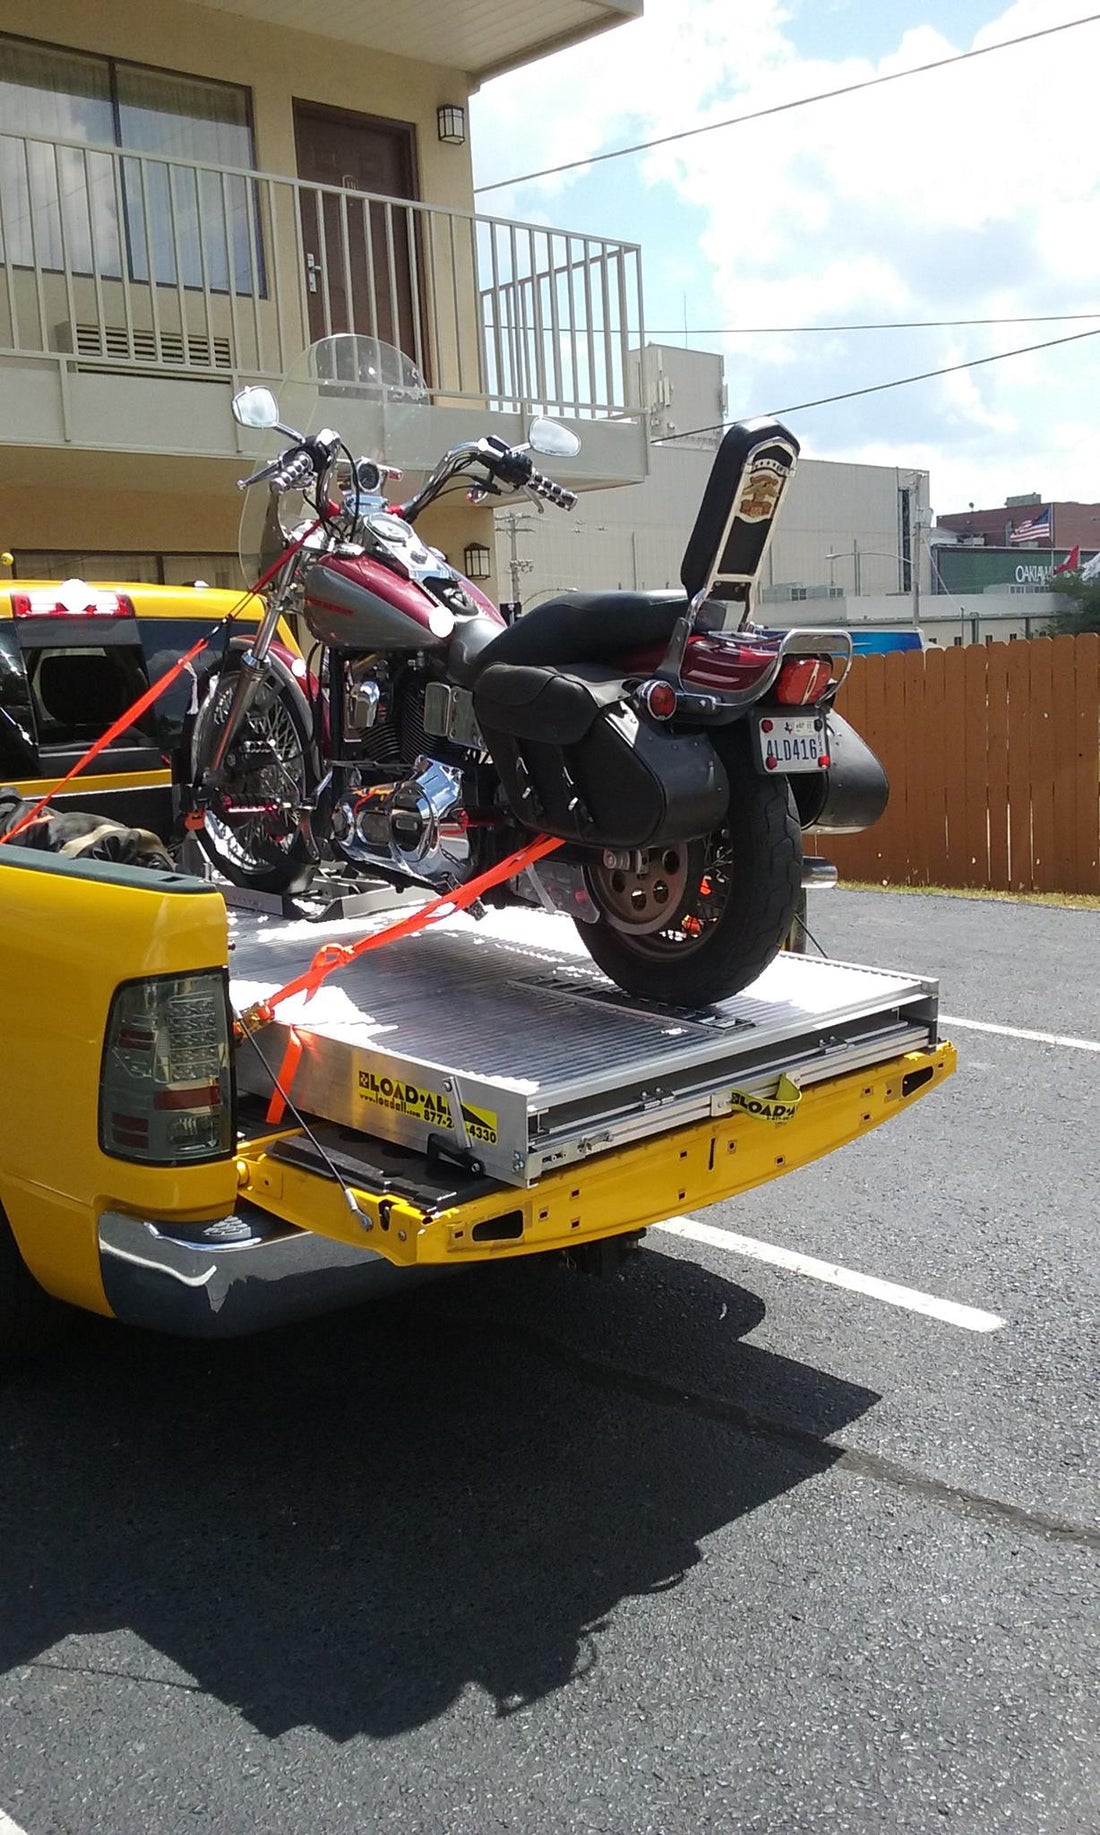 Loadall loading ramp-Made a great impression on fellow bikers